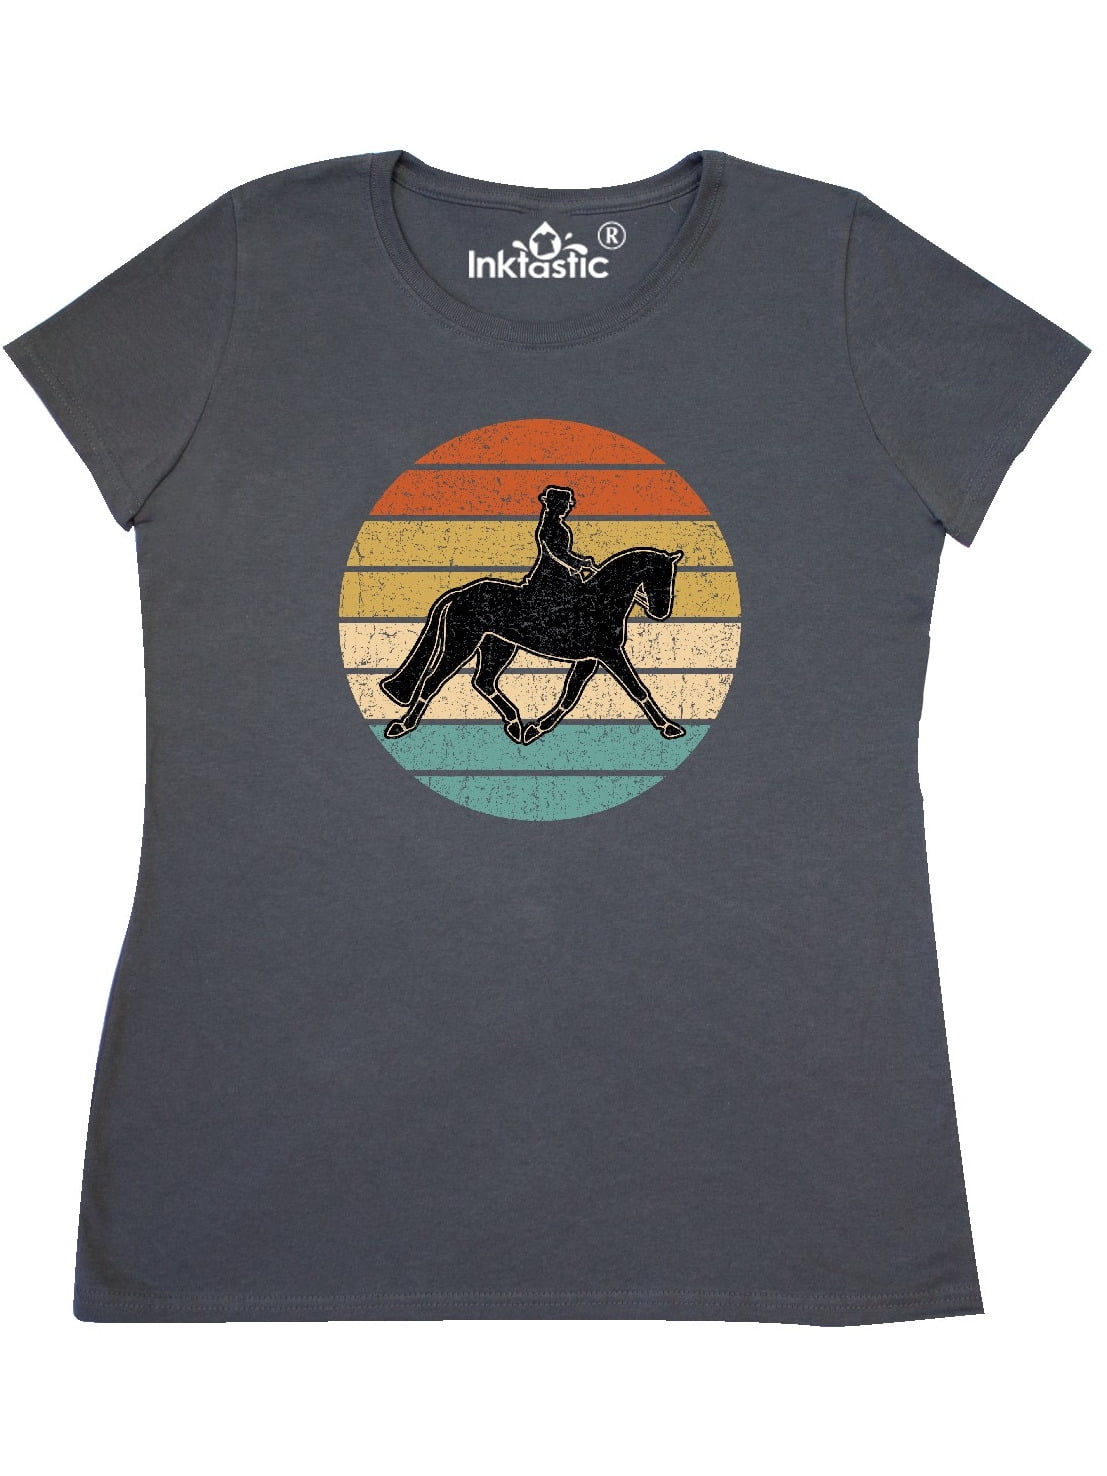 HORSE HEART Rate Life Logo Riding Showjumping Dressage New Ladies T-Shirt Top 